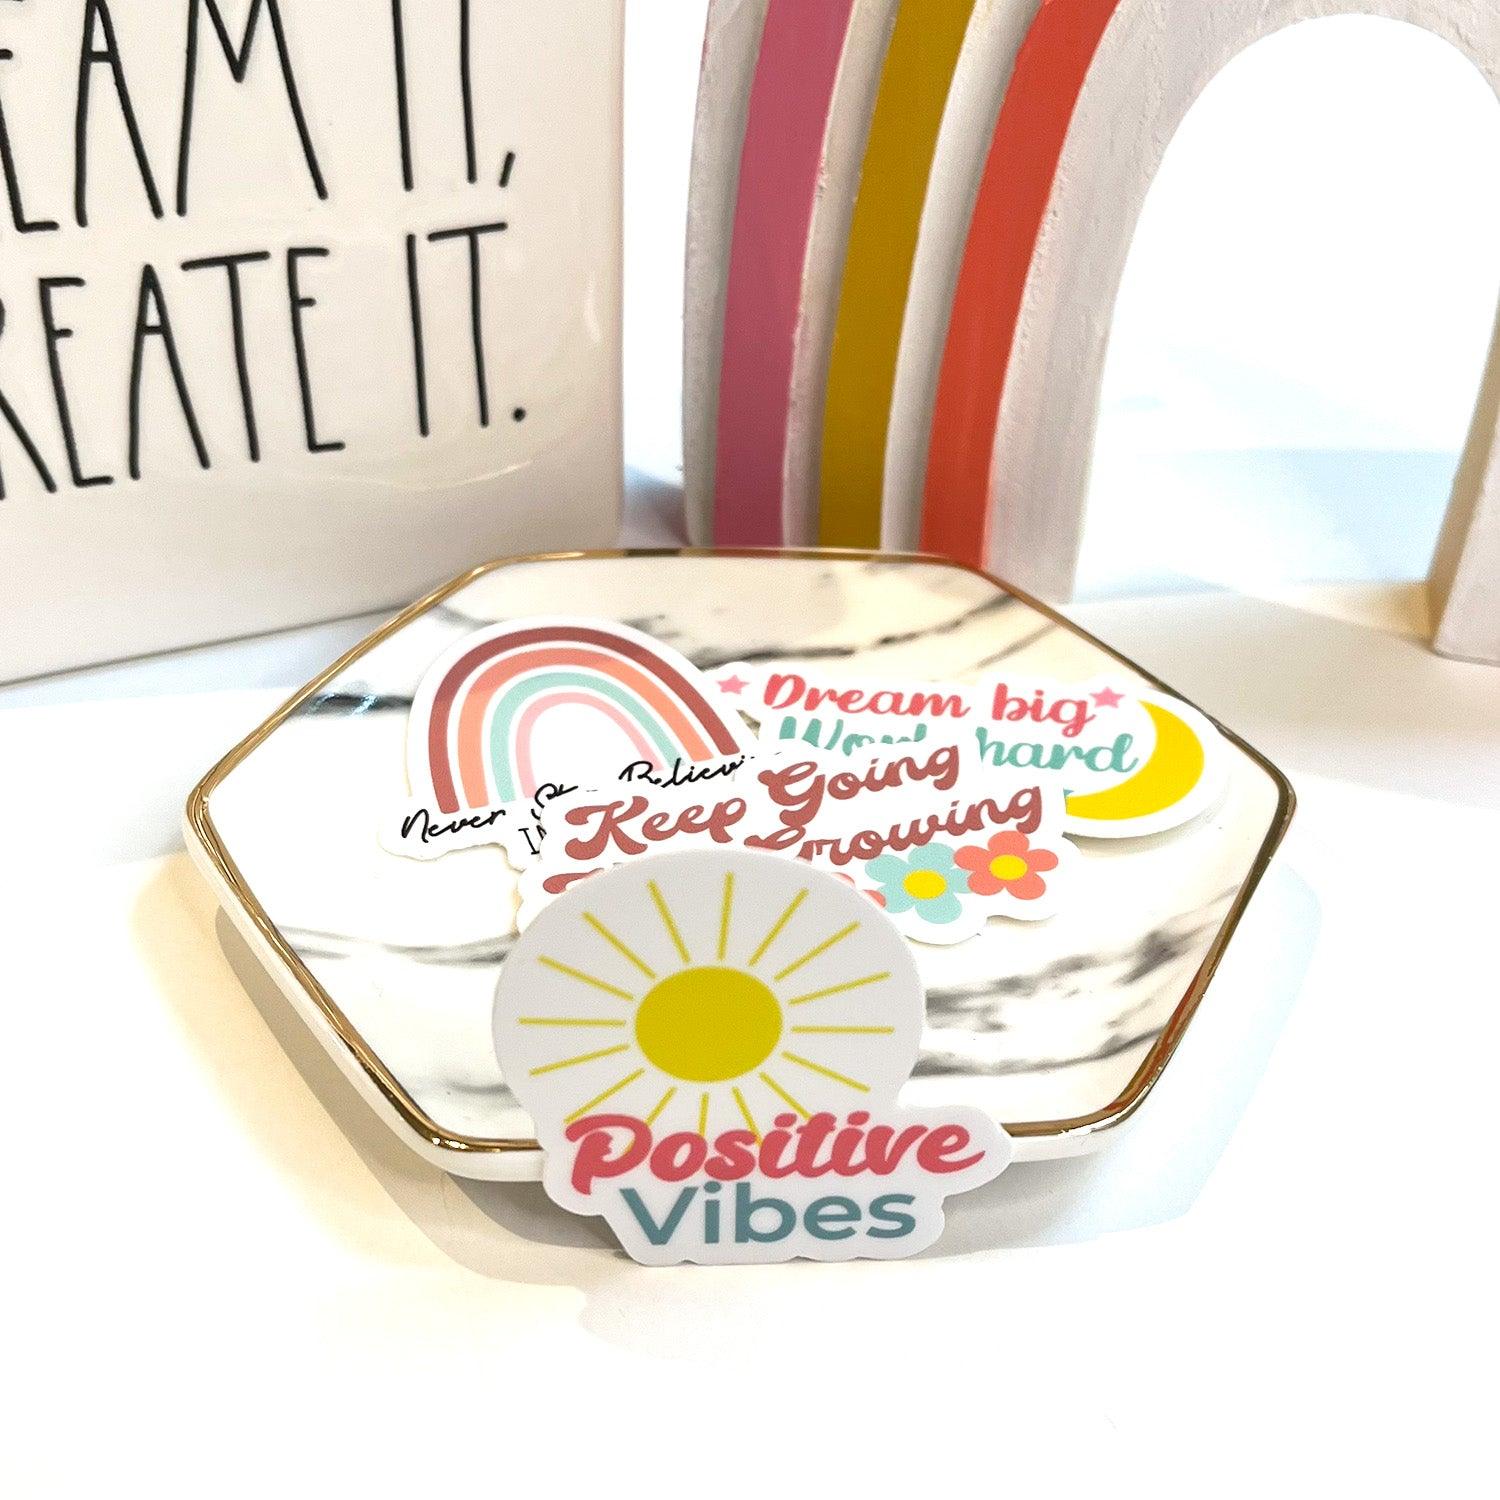 Positive Vibes sticker inside with rainbow background